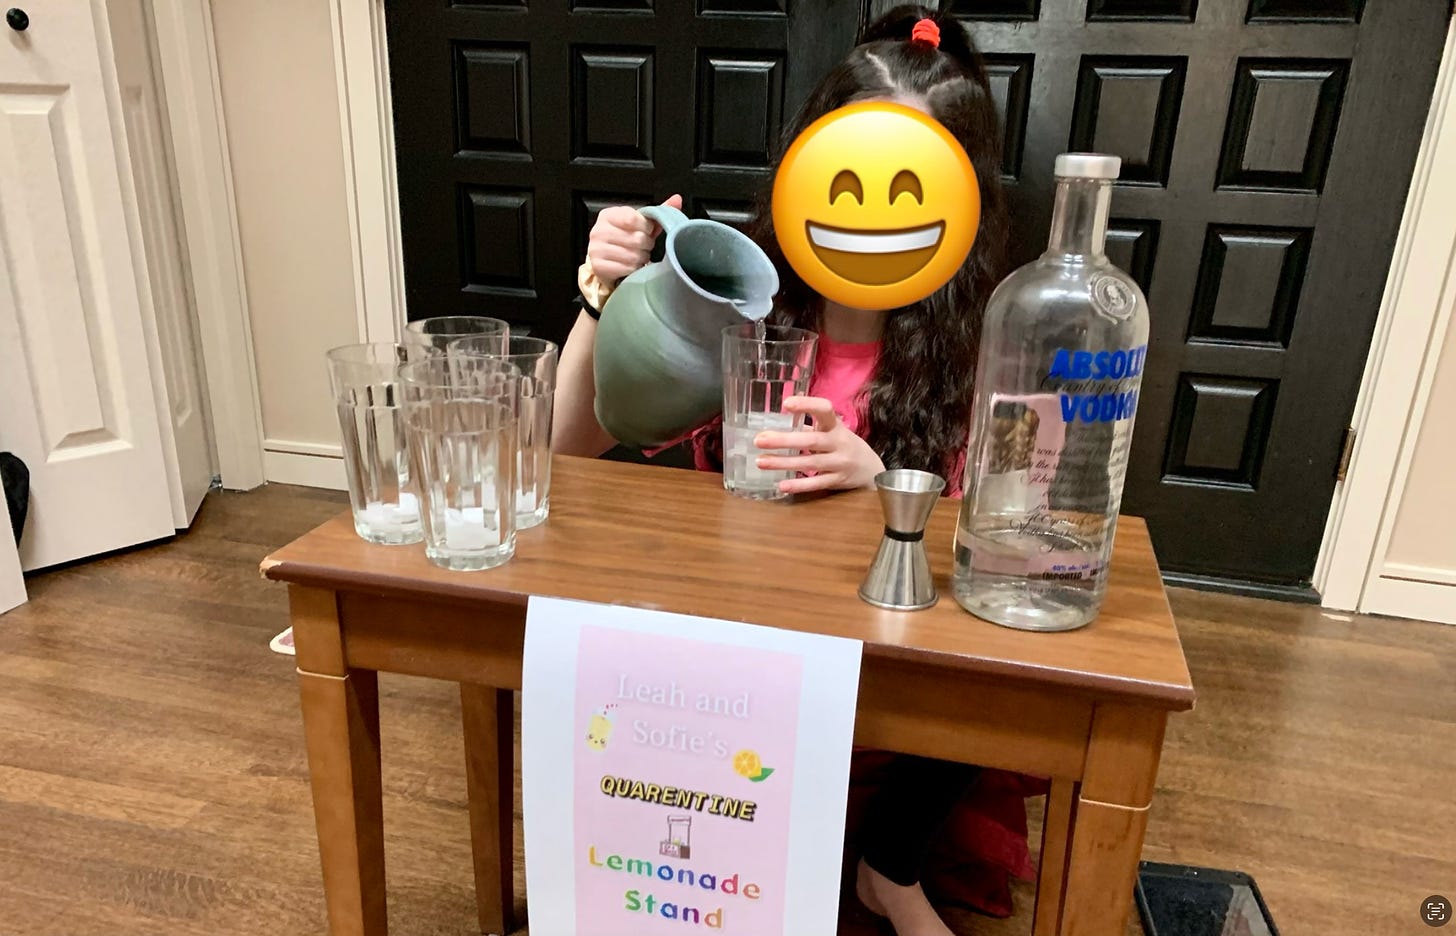 Photo of my daughter at her lemonade stand which along with cups and lemonade hosted a large bottle of vodka